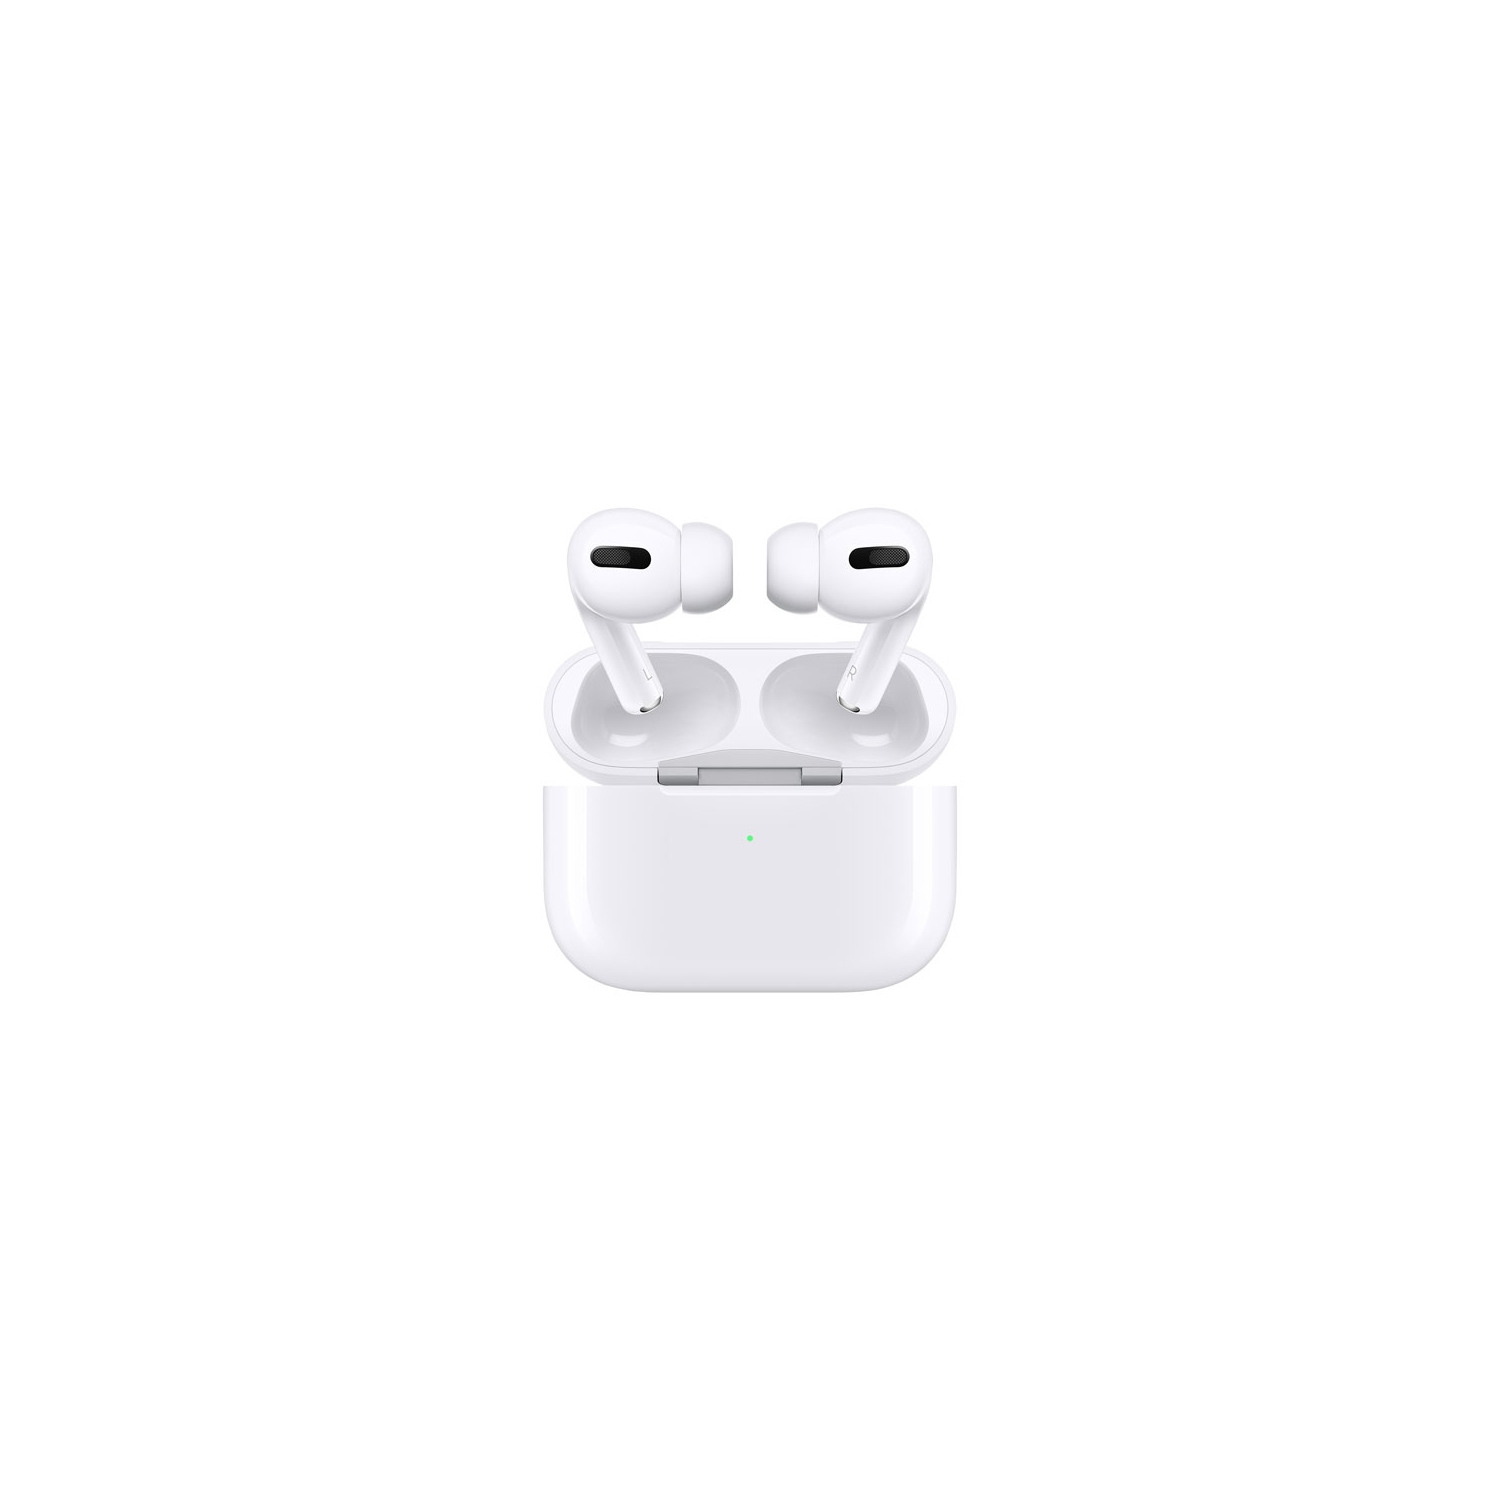 Refurbished (Good) - Apple AirPods Pro In-Ear Noise Cancelling True Wireless Earbuds with MagSafe Charging Case - White